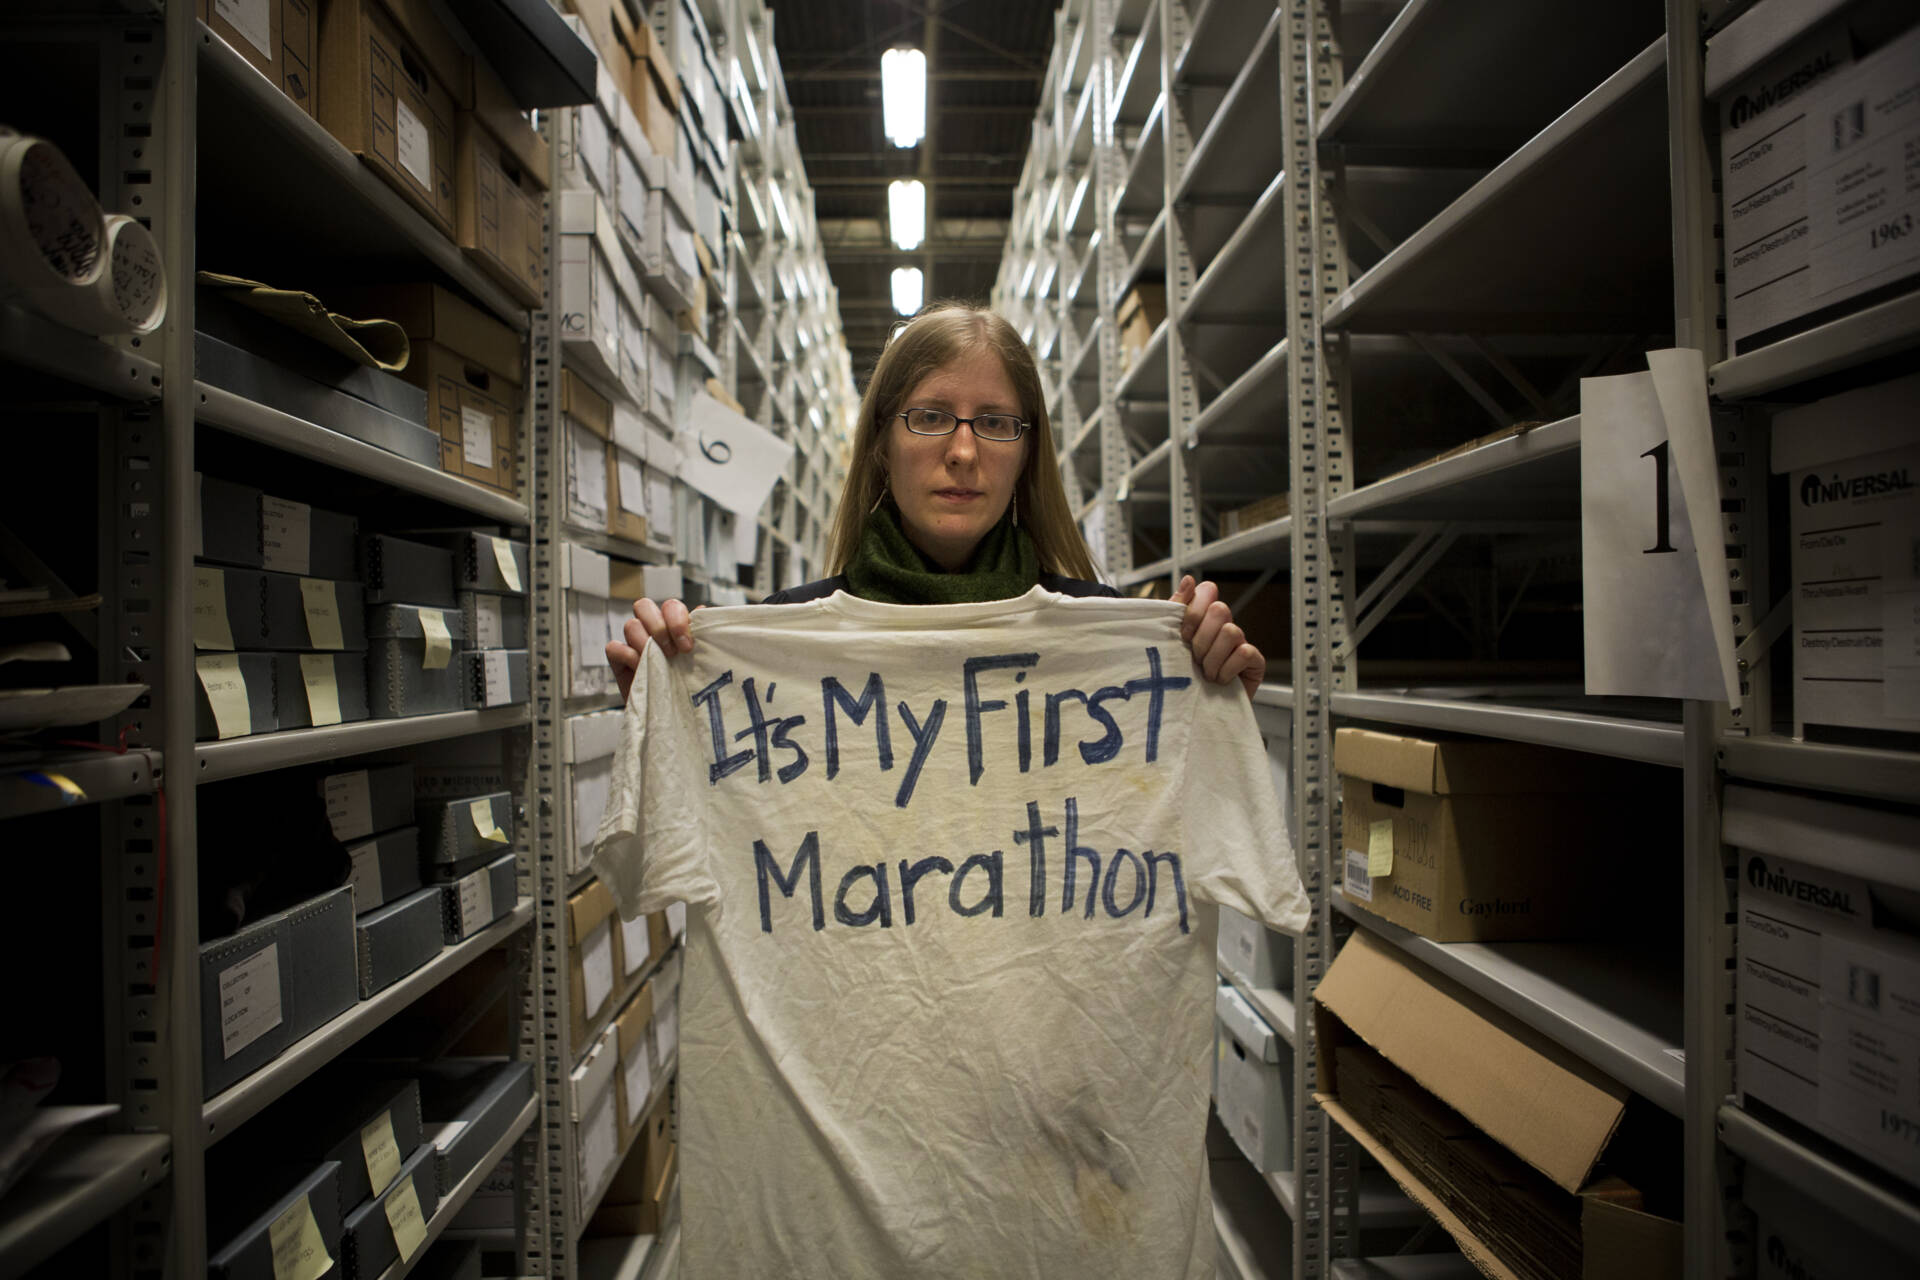 City archivist Marta Crilly holds a &quot;It's My First Marathon&quot; t-shirt inside a cavernous, temperature-controlled warehouse in West Roxbury holding dozens of boxes on its towering shelves that contain items from a makeshift memorial at Copley Square after the bombings. (Jesse Costa/WBUR)